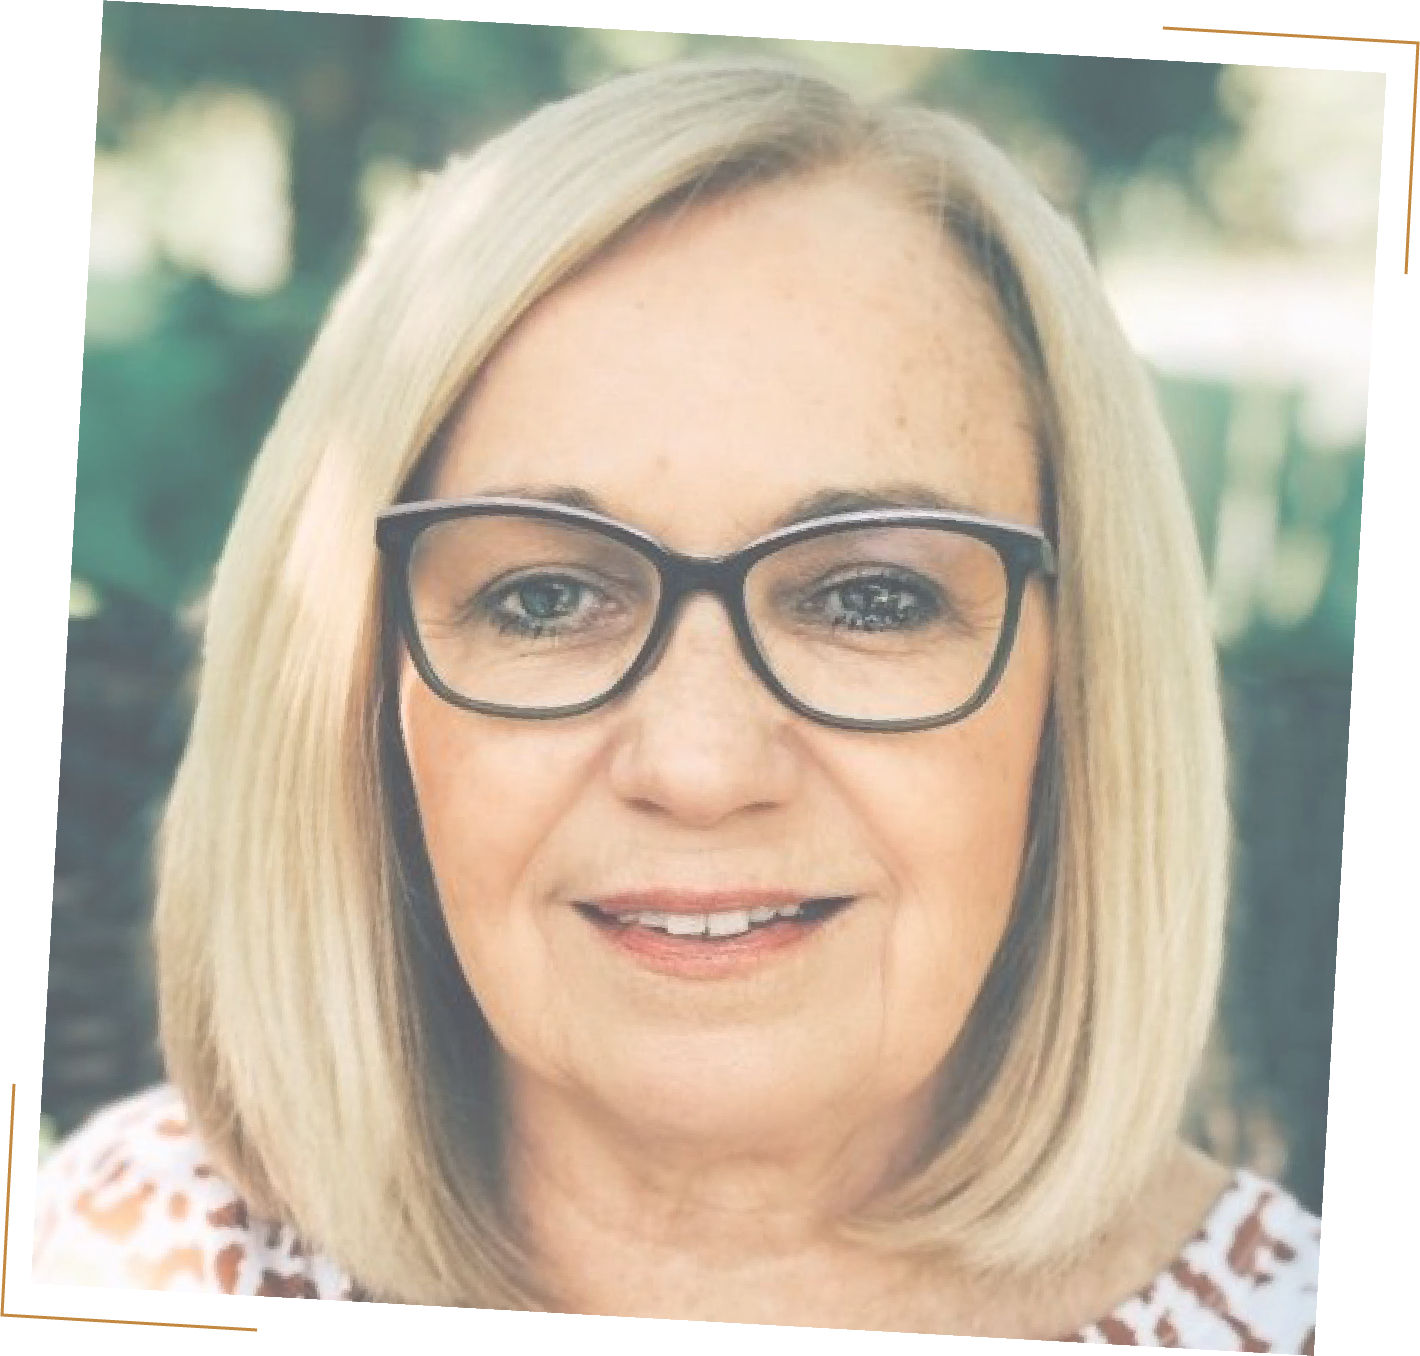 blond woman with short hair wearing glasses and smiling | Lisa Bond Coaching | DBT skills and solutions for borderline personality disorder and high emotional sensitivity